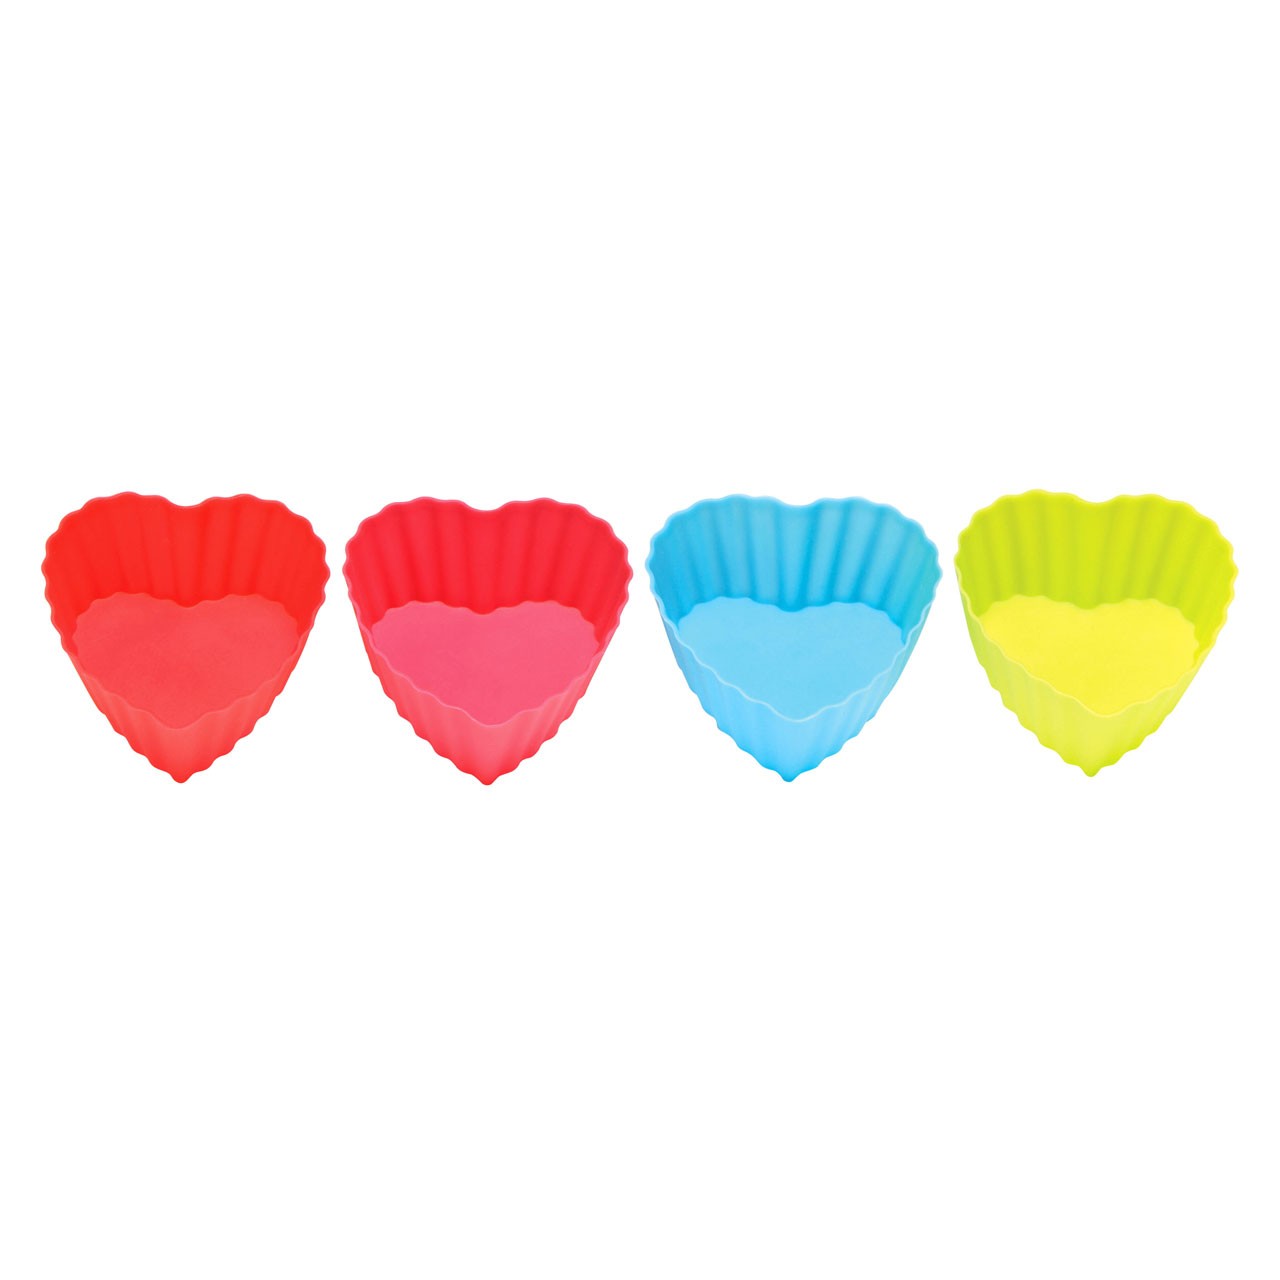 Silicone Heart Moulds - Set of 4